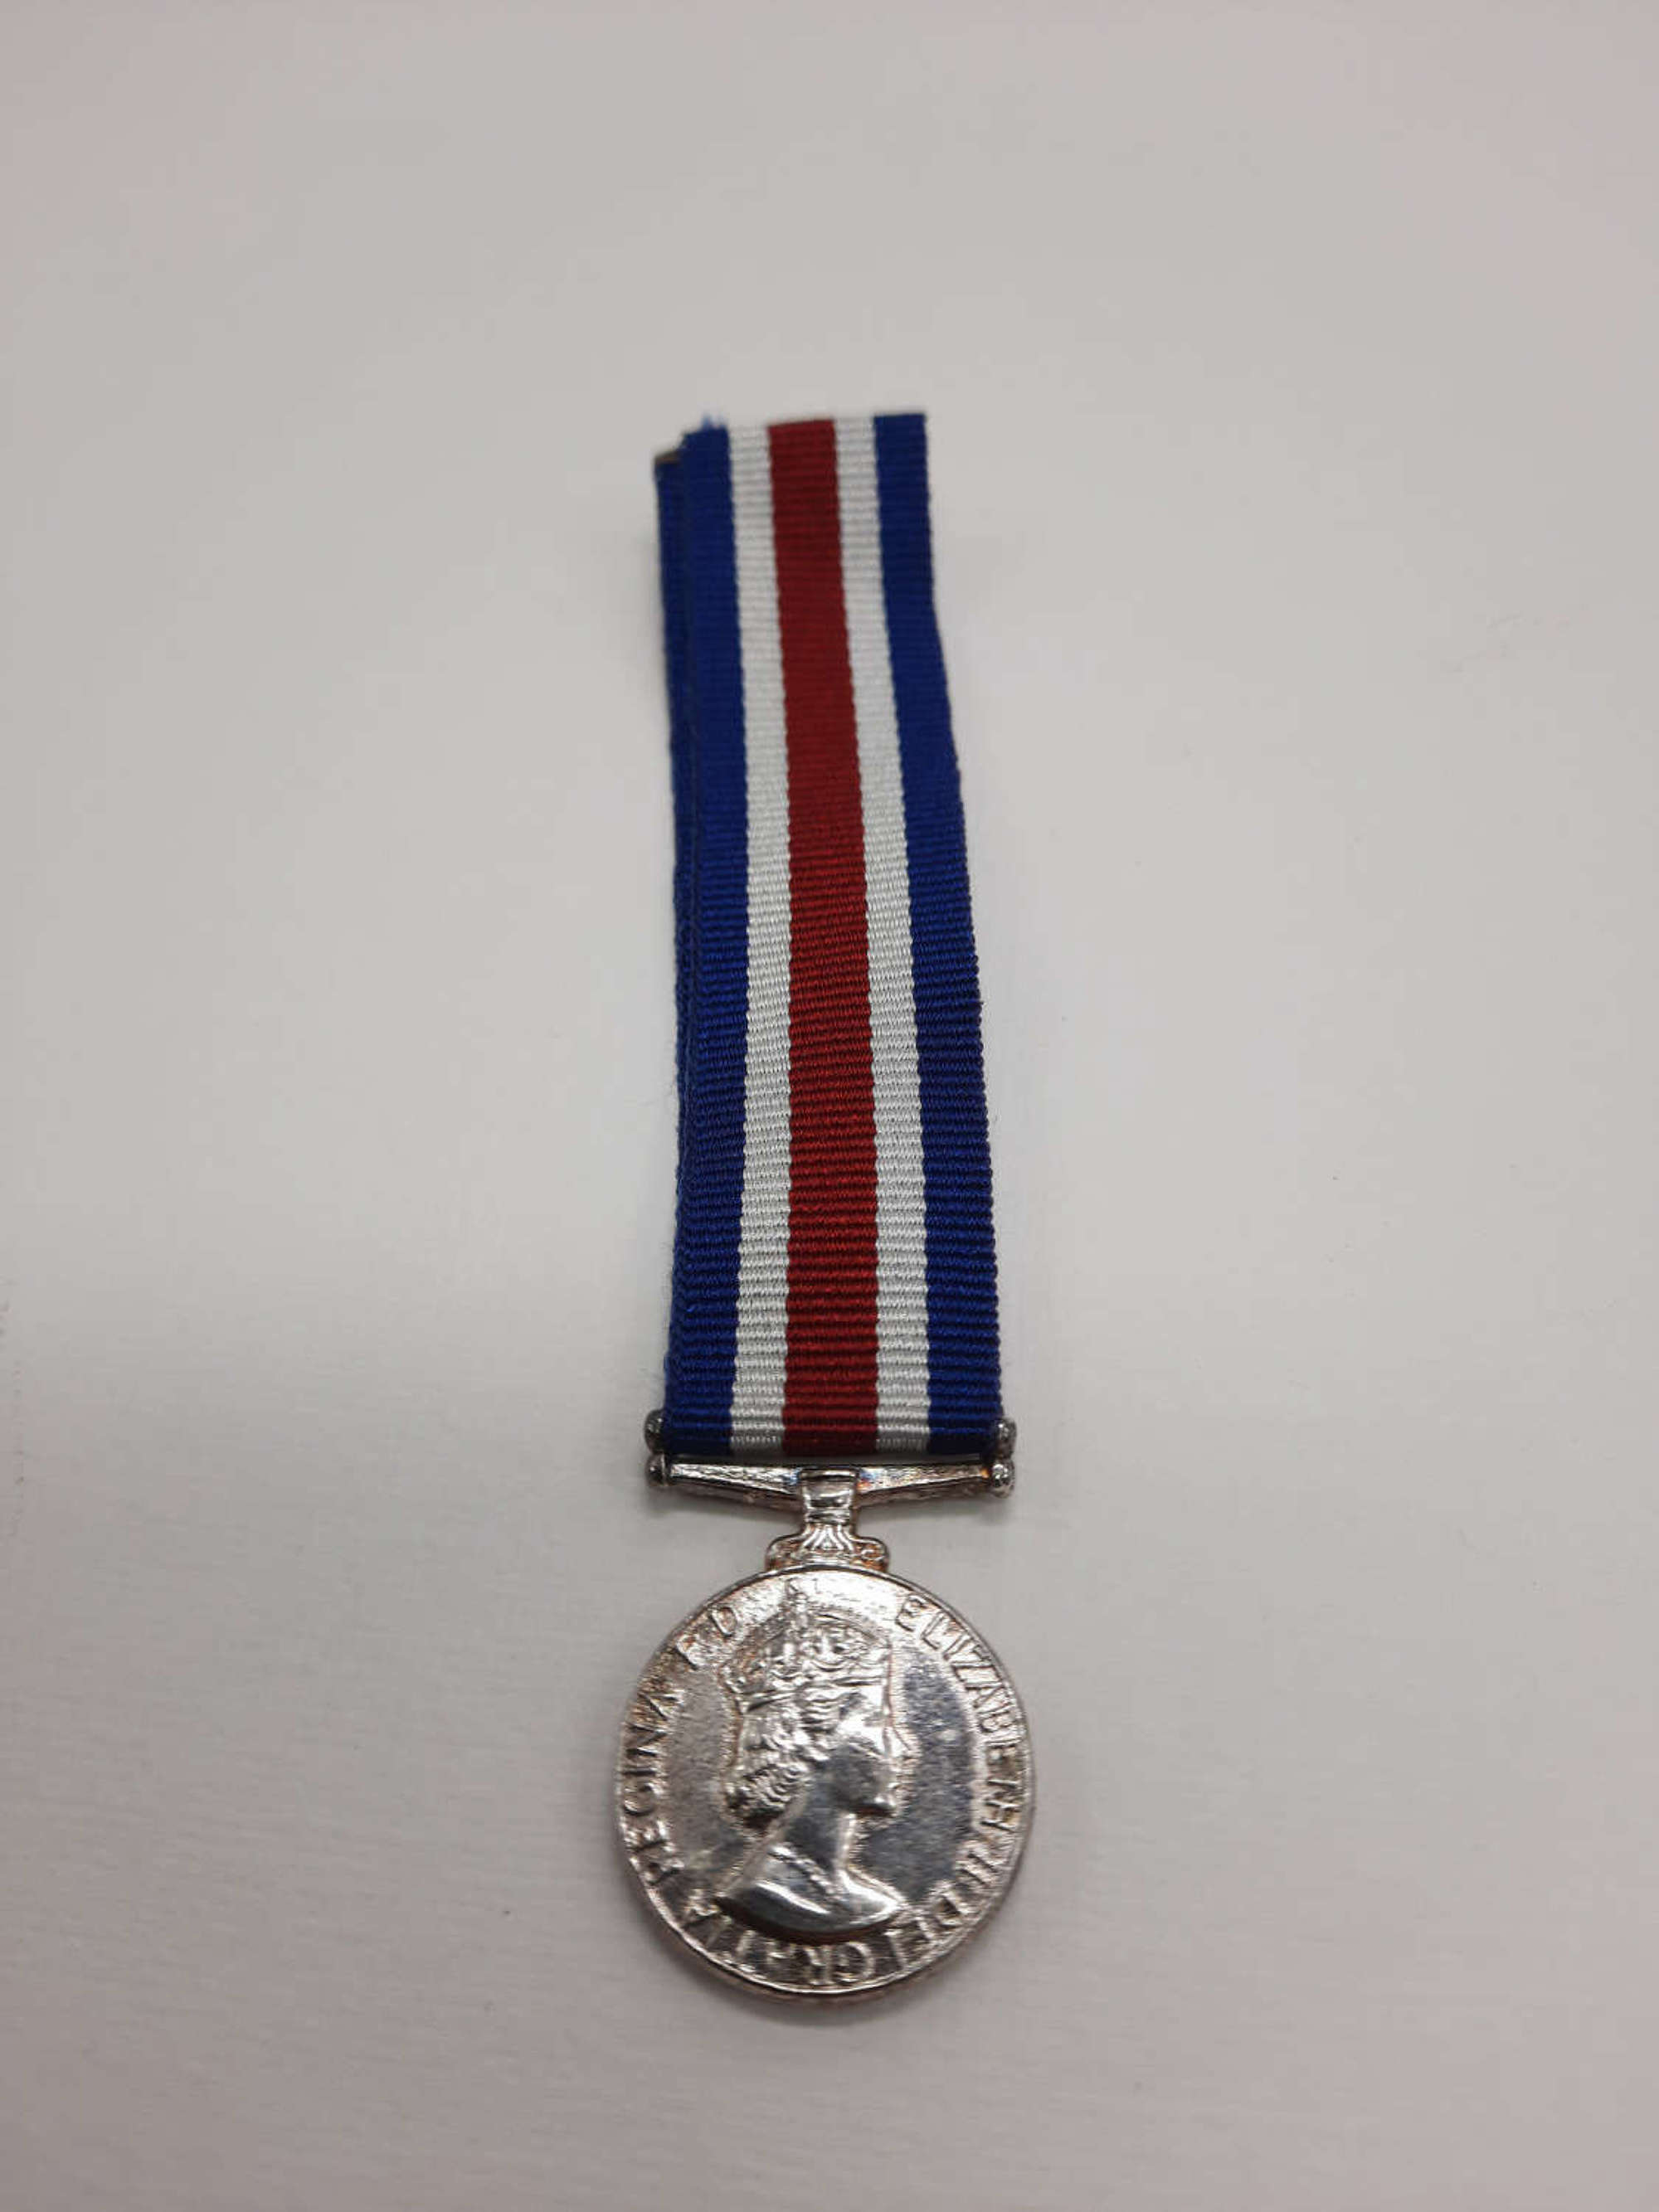 Queen’s Medal for Champion Shots Miniature